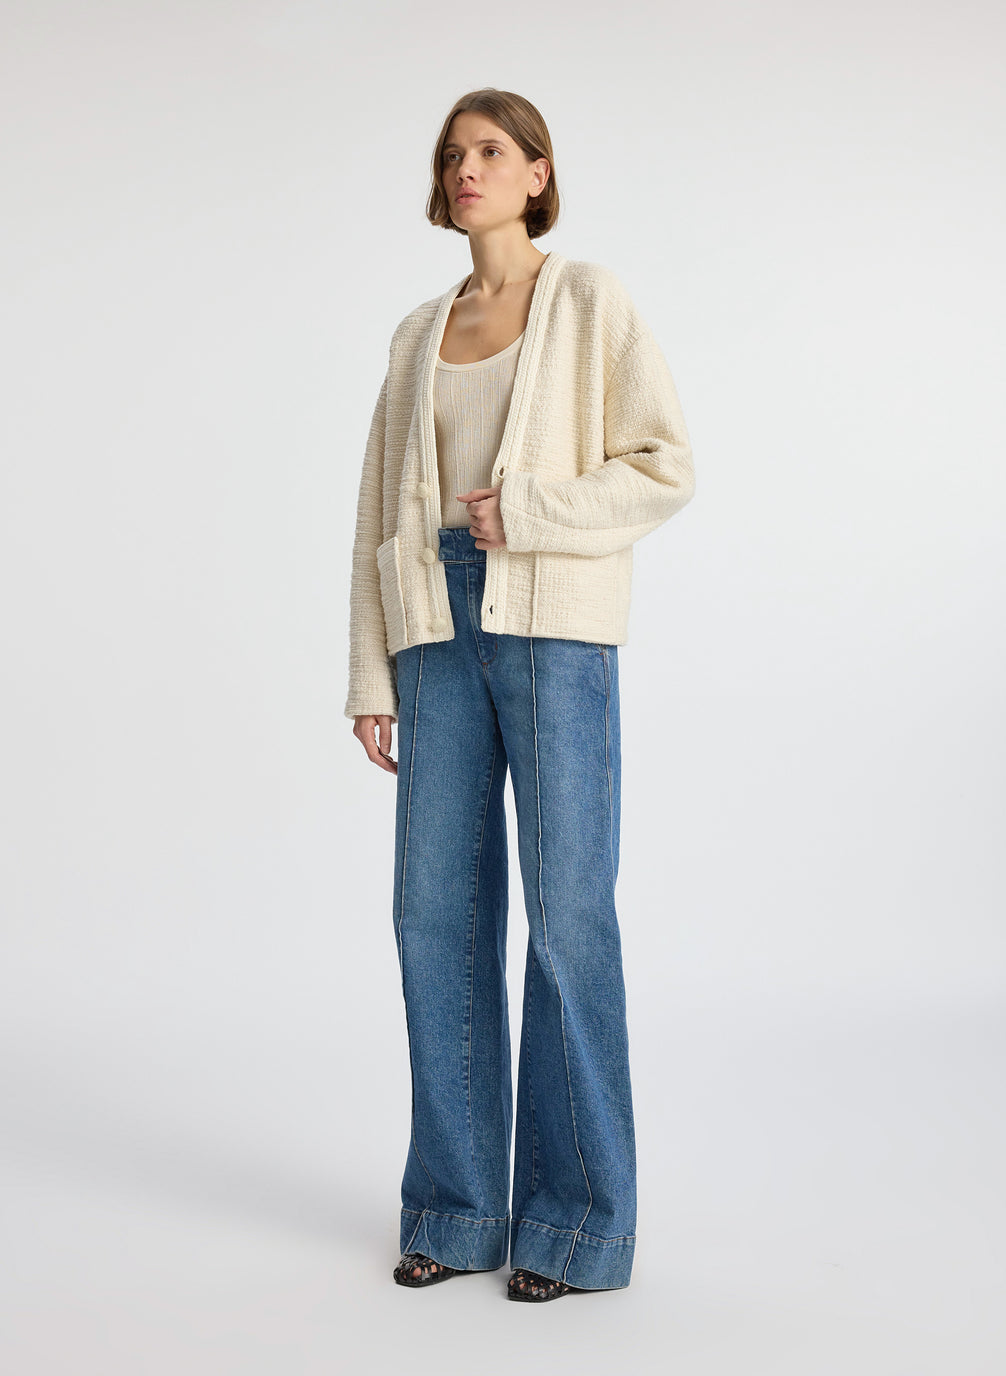 side view of woman wearing cream boucle jacket, cream tank top and medium blue denim jeans